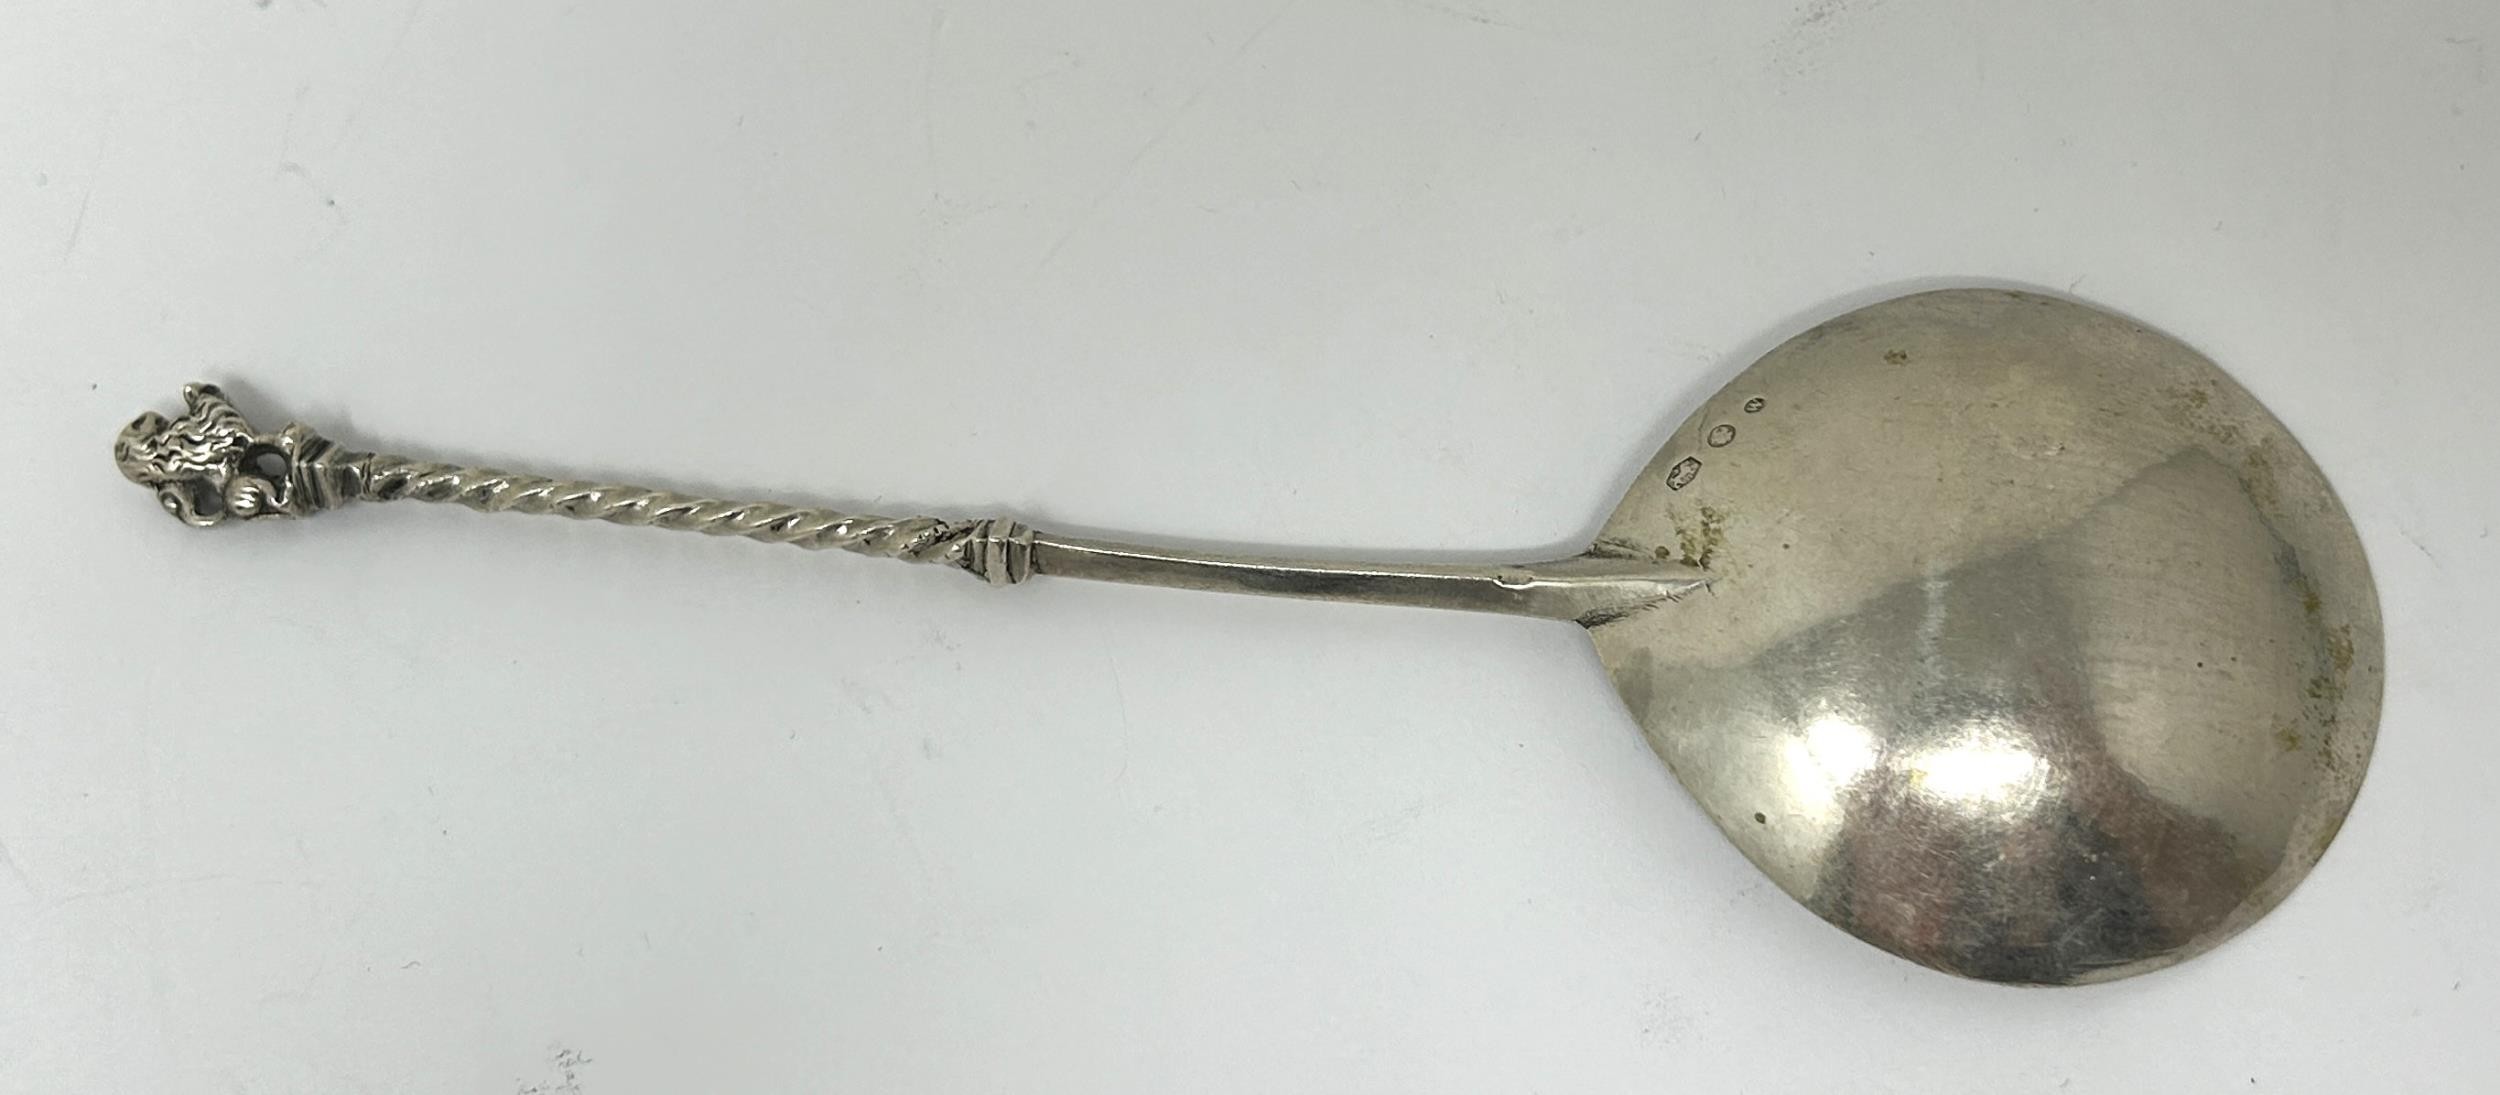 A 19th century French silver spoon, with a lion finial, 30 g - Image 4 of 5